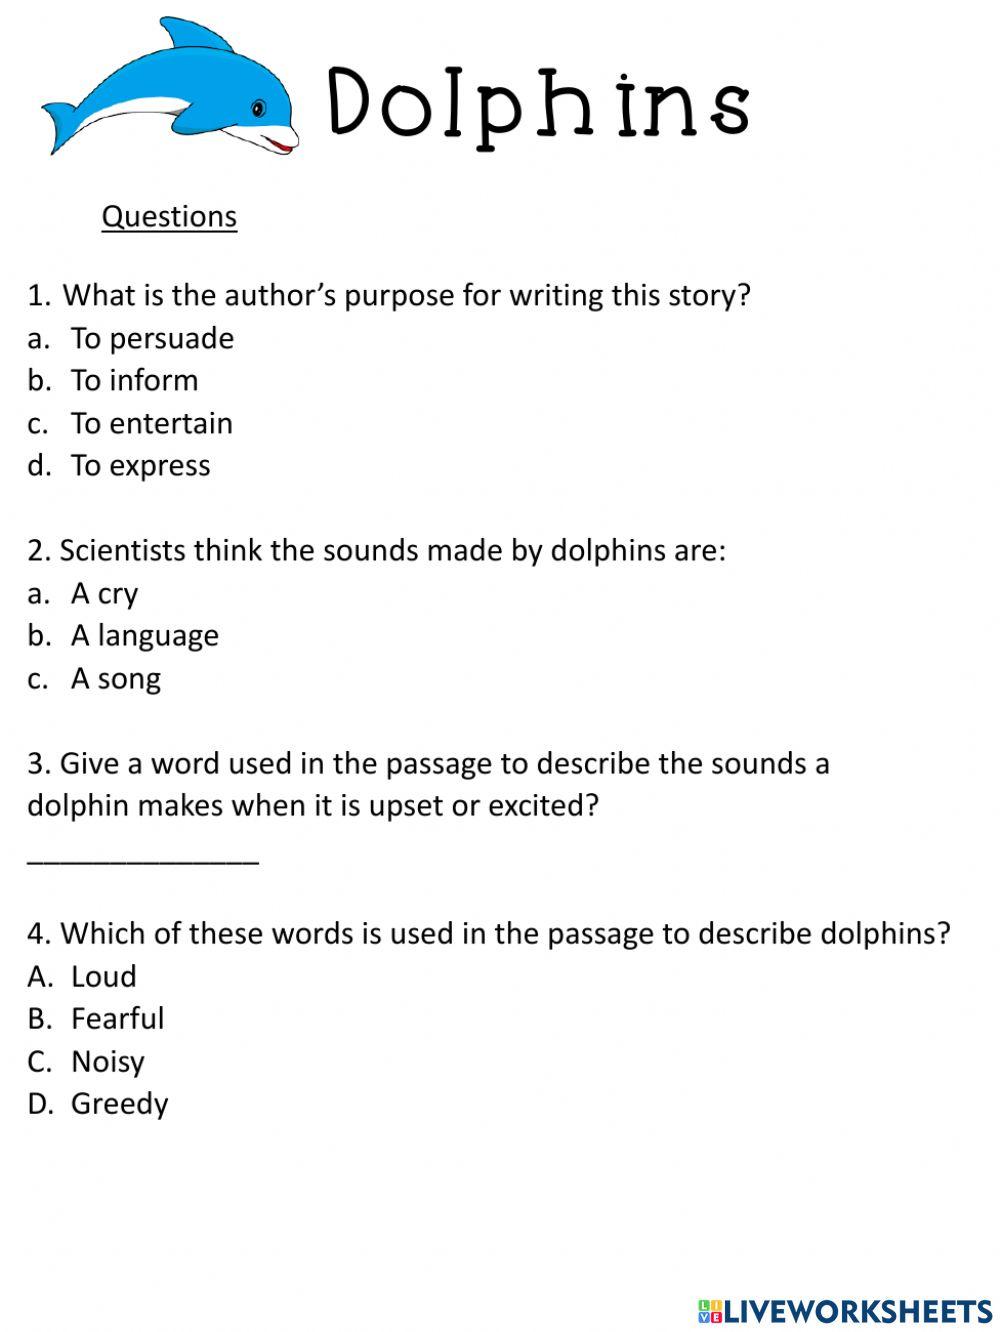 Listening Comprehension -Dolphins